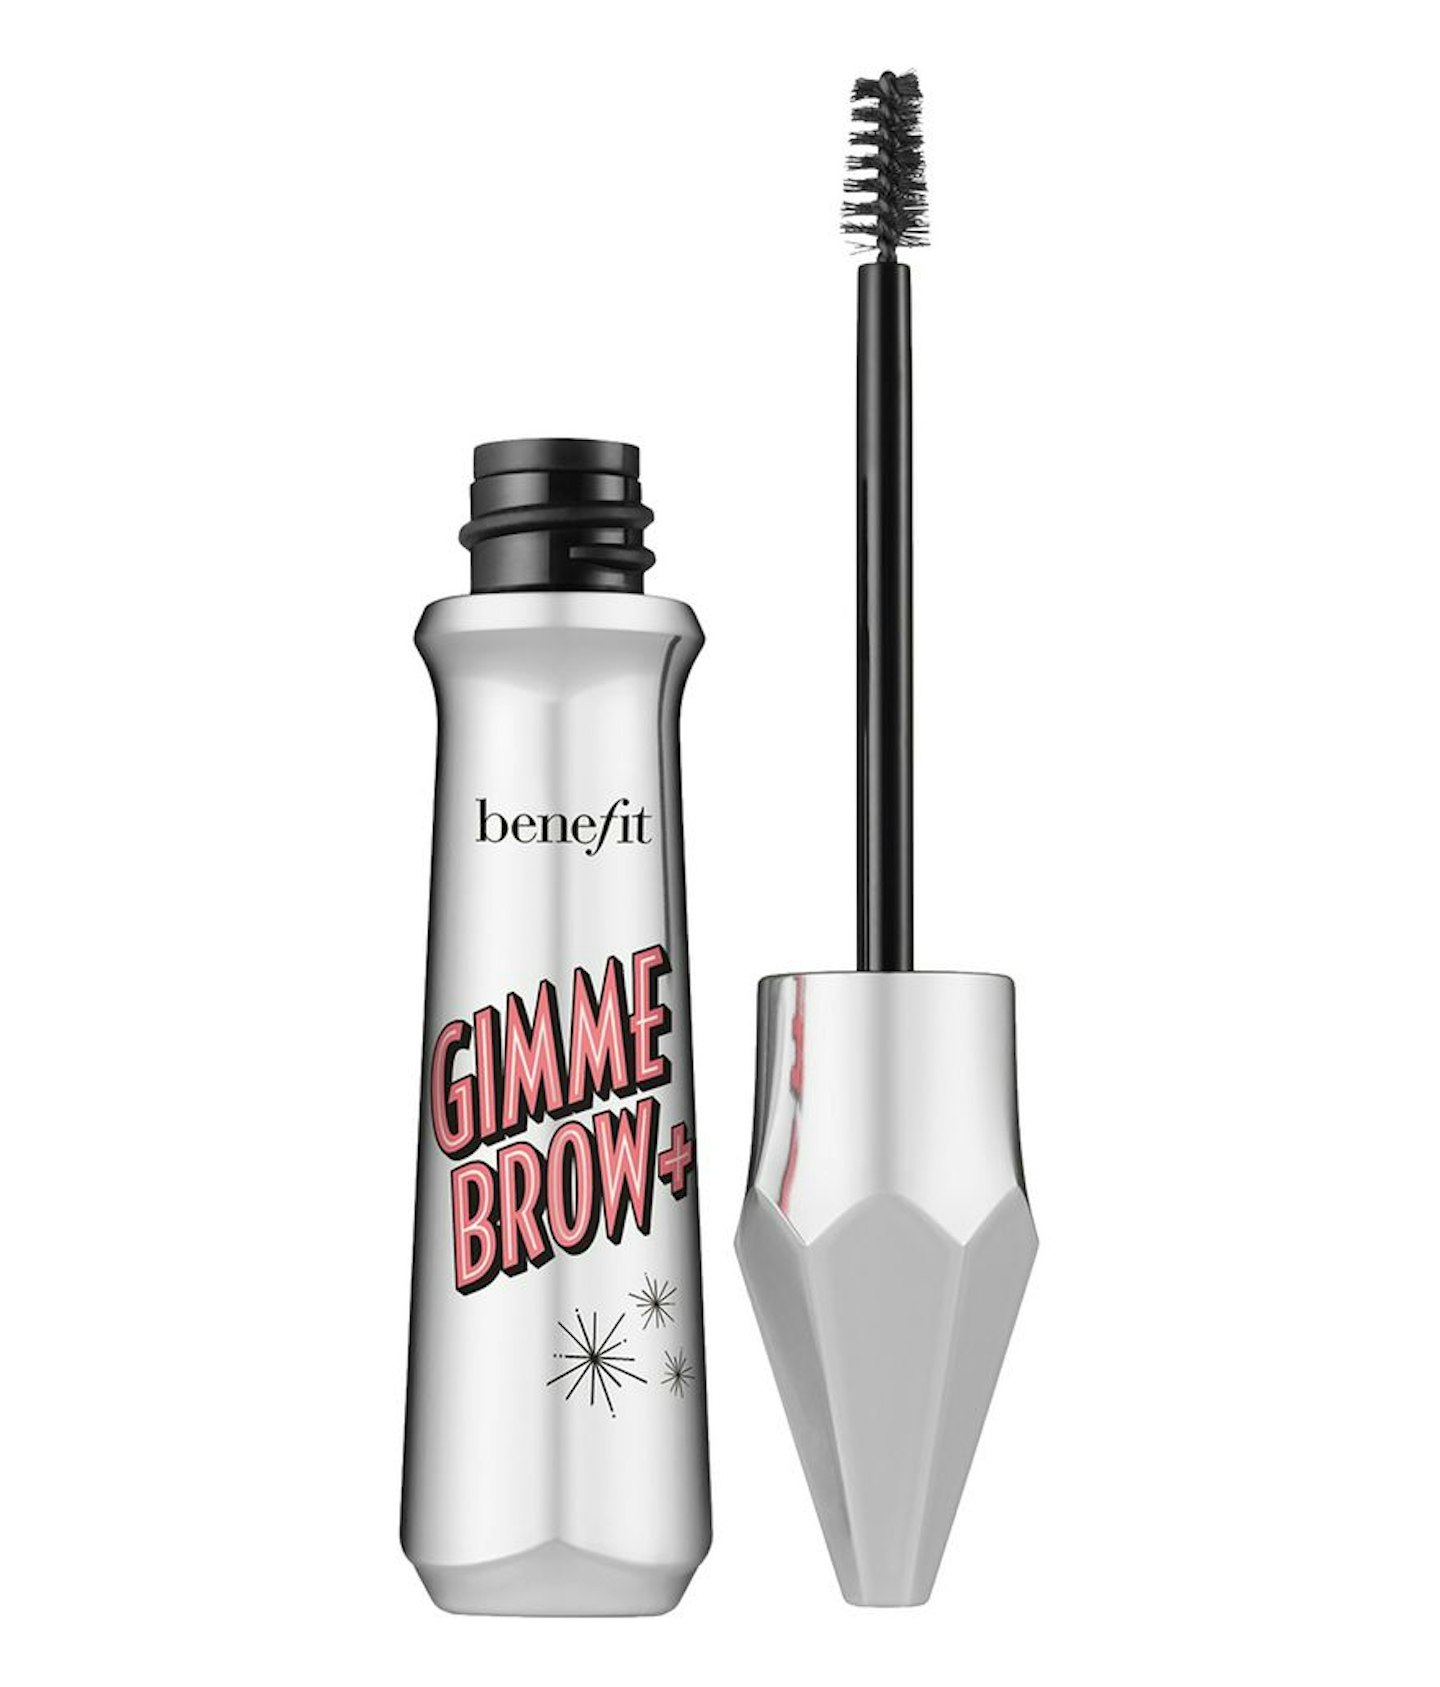 Benefit Gimme Brow, £21.50